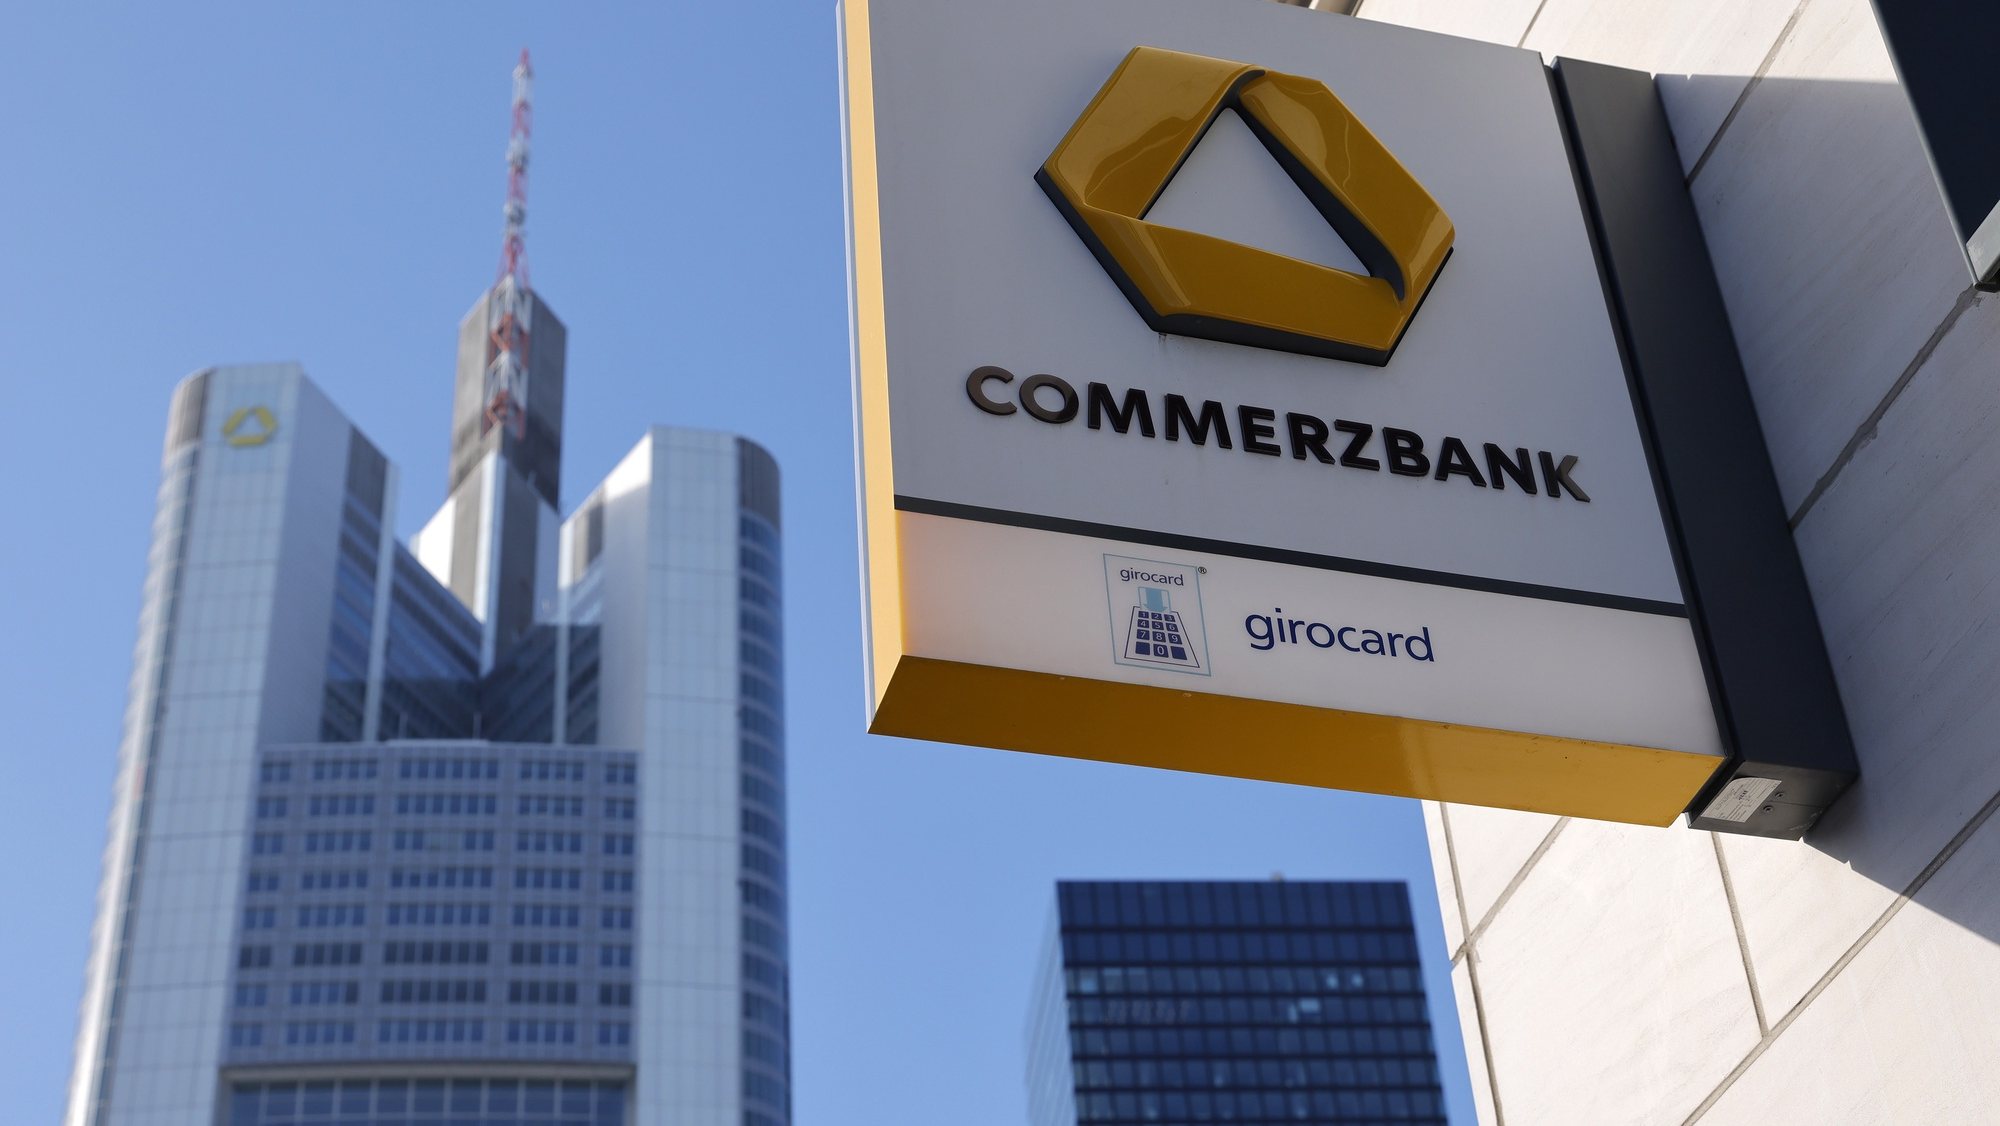 epa08998394 A view on the Commerzbank office tower seen behind a Commerzbank signage at its local branch in Frankfurt am Main, Germany, 09 February 2021. Commerzbank will release their preliminary business figures for the fourth quarter Q4 and the full year 2020 on 11 February 2021.  EPA/RONALD WITTEK